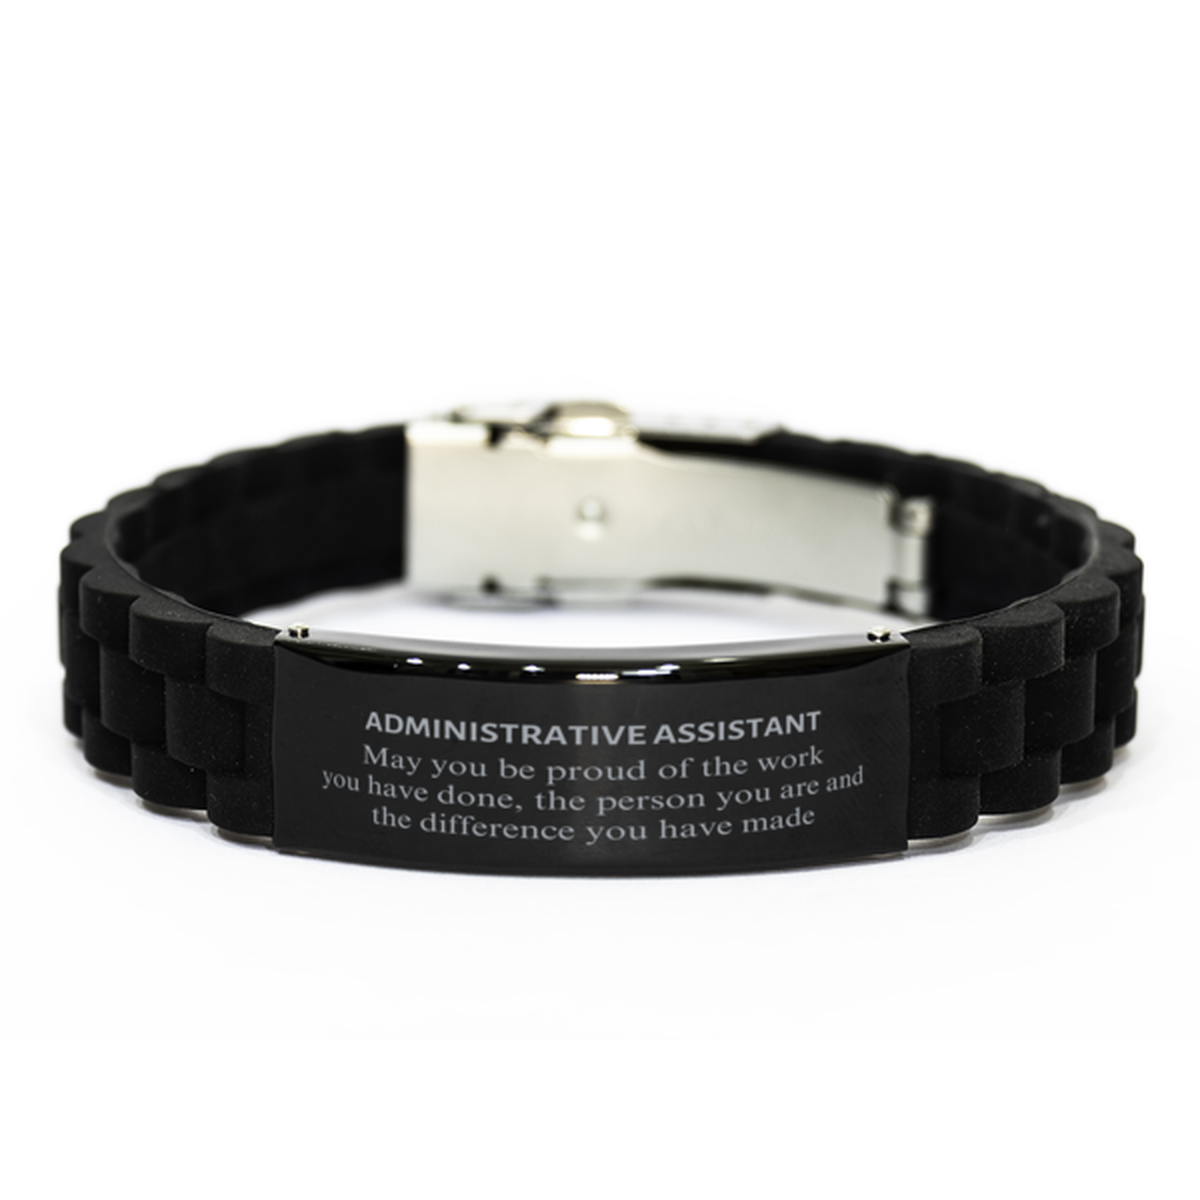 Administrative Assistant May you be proud of the work you have done, Retirement Administrative Assistant Black Glidelock Clasp Bracelet for Colleague Appreciation Gifts Amazing for Administrative Assistant